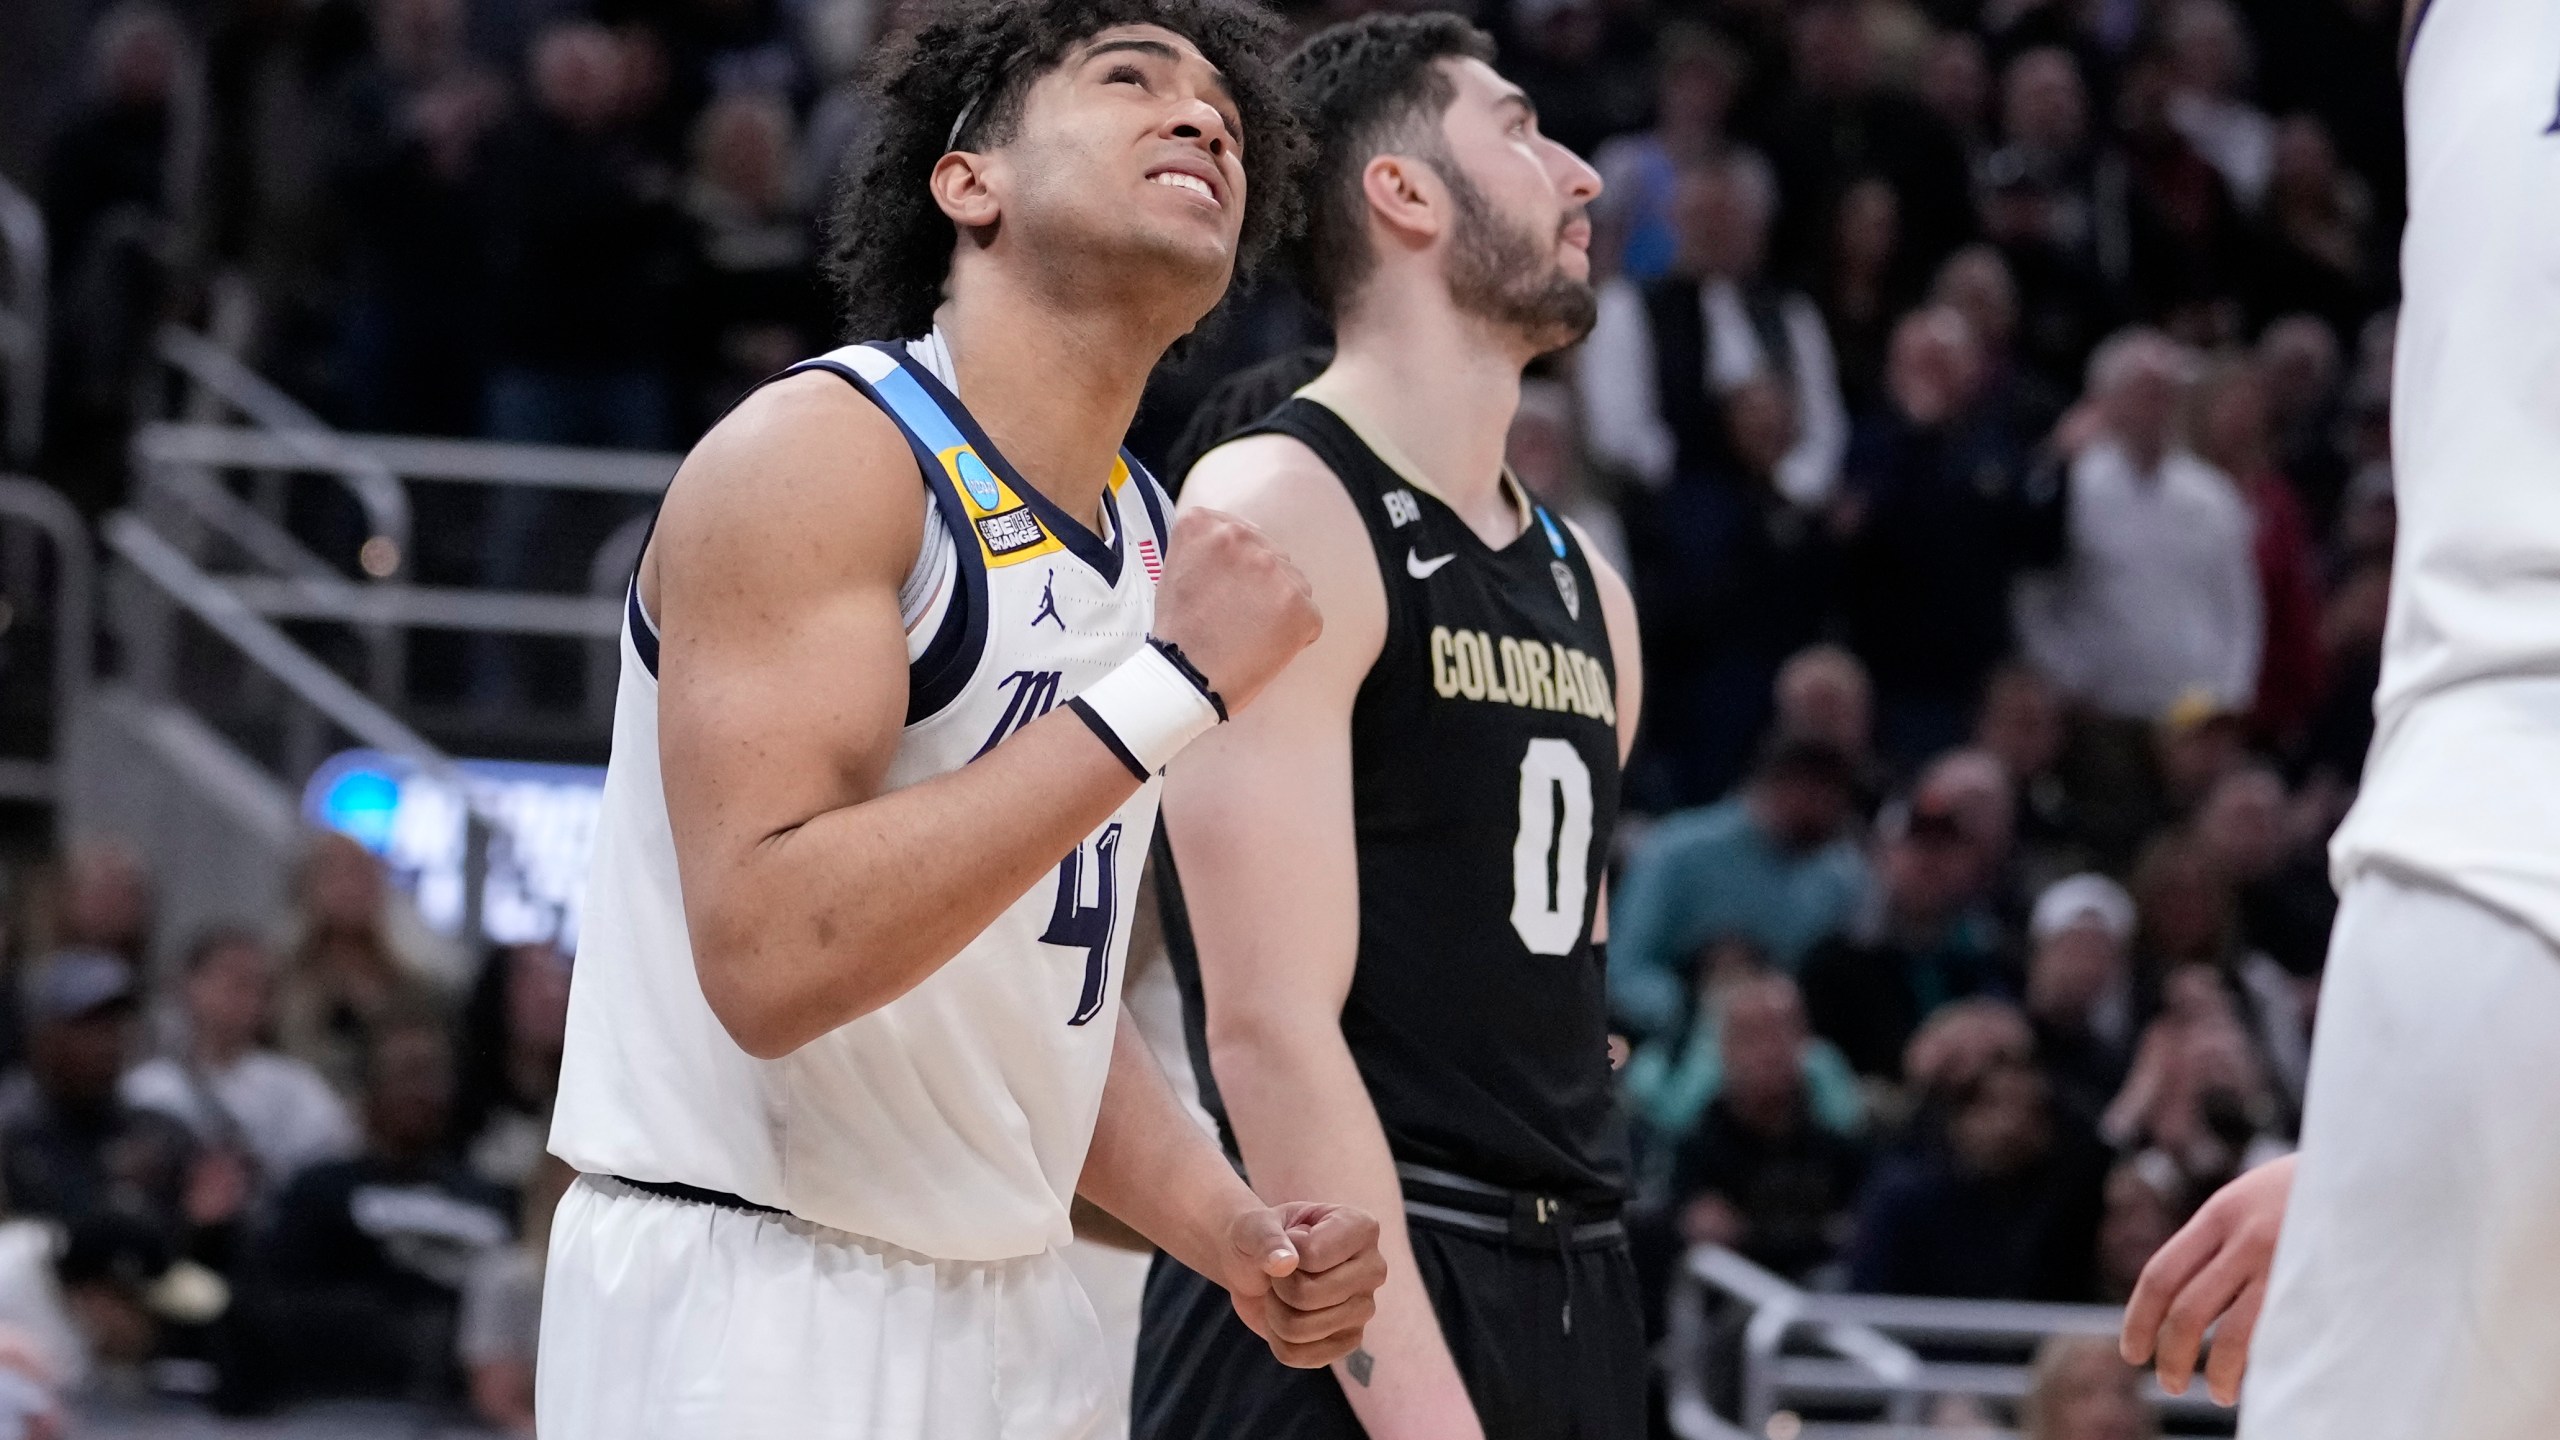 Marquette's Stevie Mitchell (4) celebrates alongside Colorado's Luke O'Brien following a second-round college basketball game in the NCAA Tournament, Sunday, March 24, 2024 in Indianapolis. Marquette won 81-77. (AP Photo/Michael Conroy)